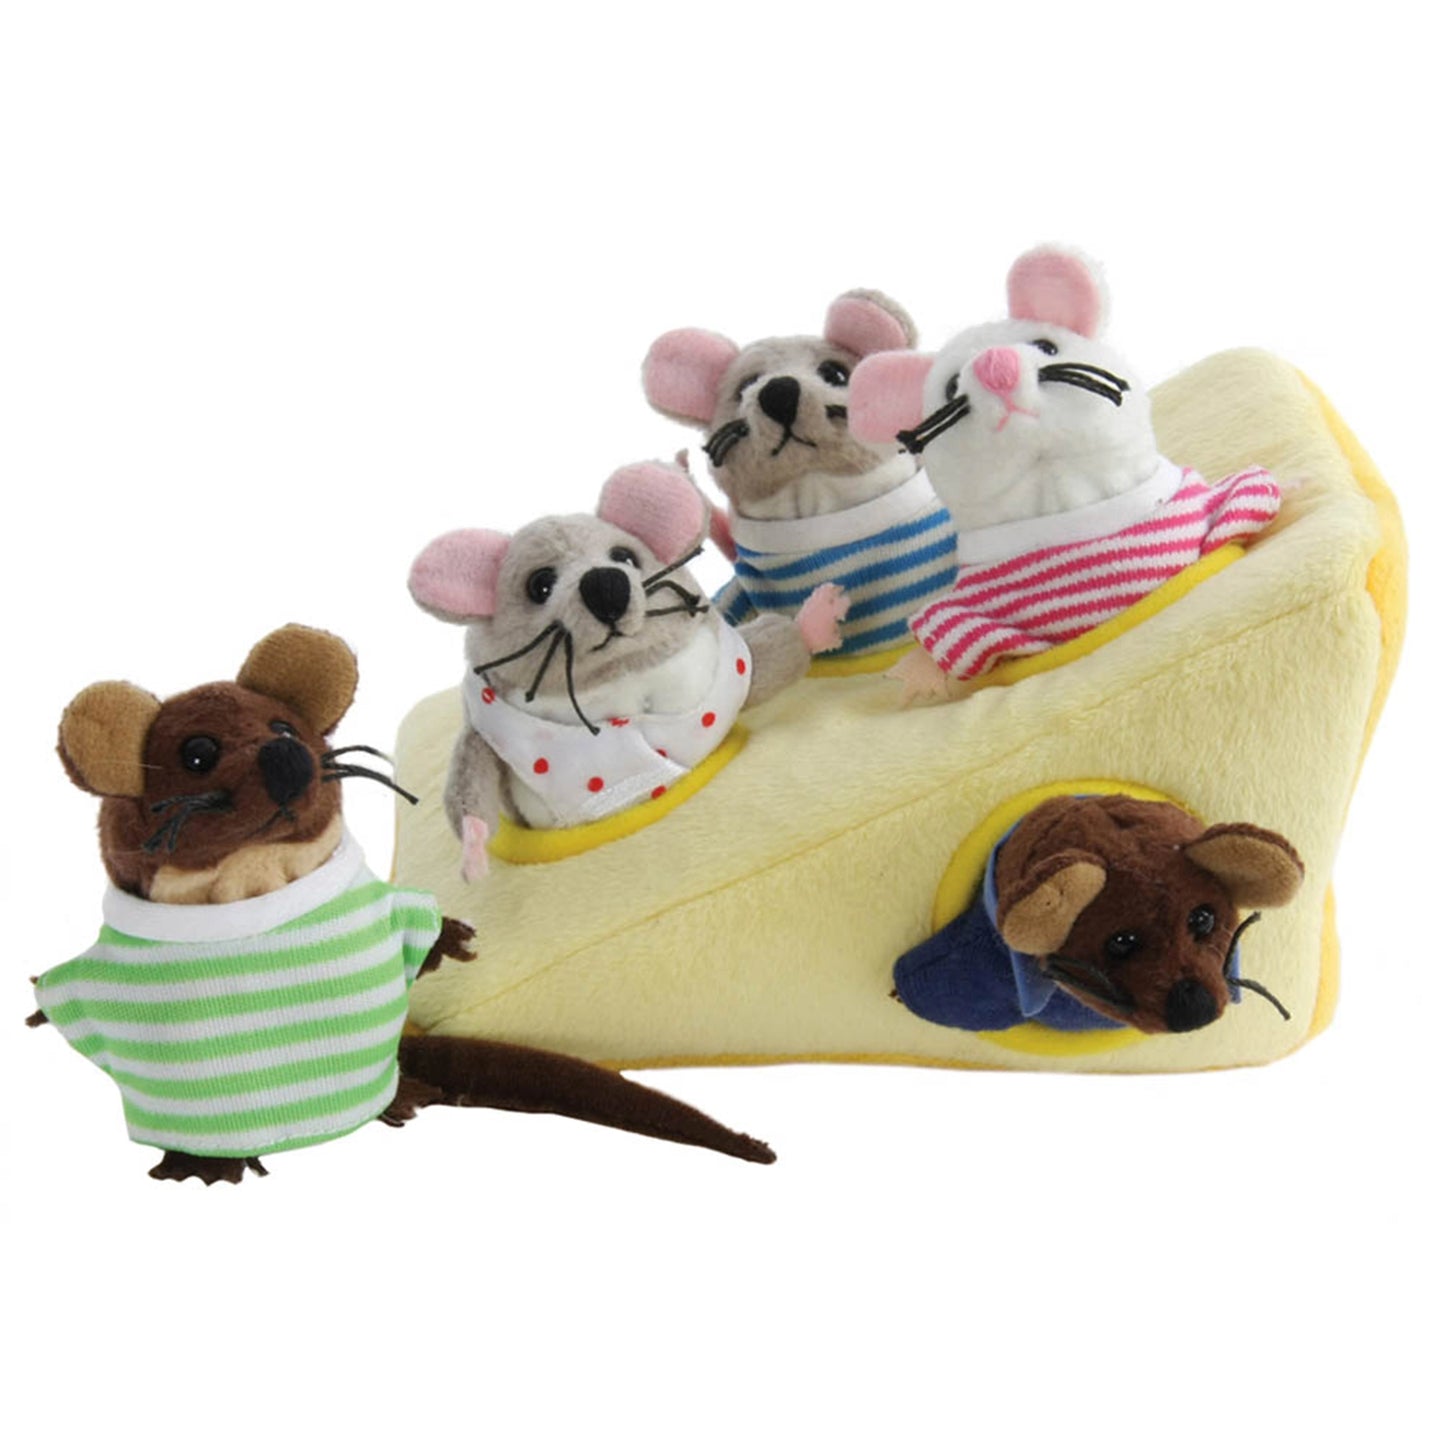 Hide-Away Puppets - Mouse Family in Cheese - The Puppet Company - The Forgotten Toy Shop